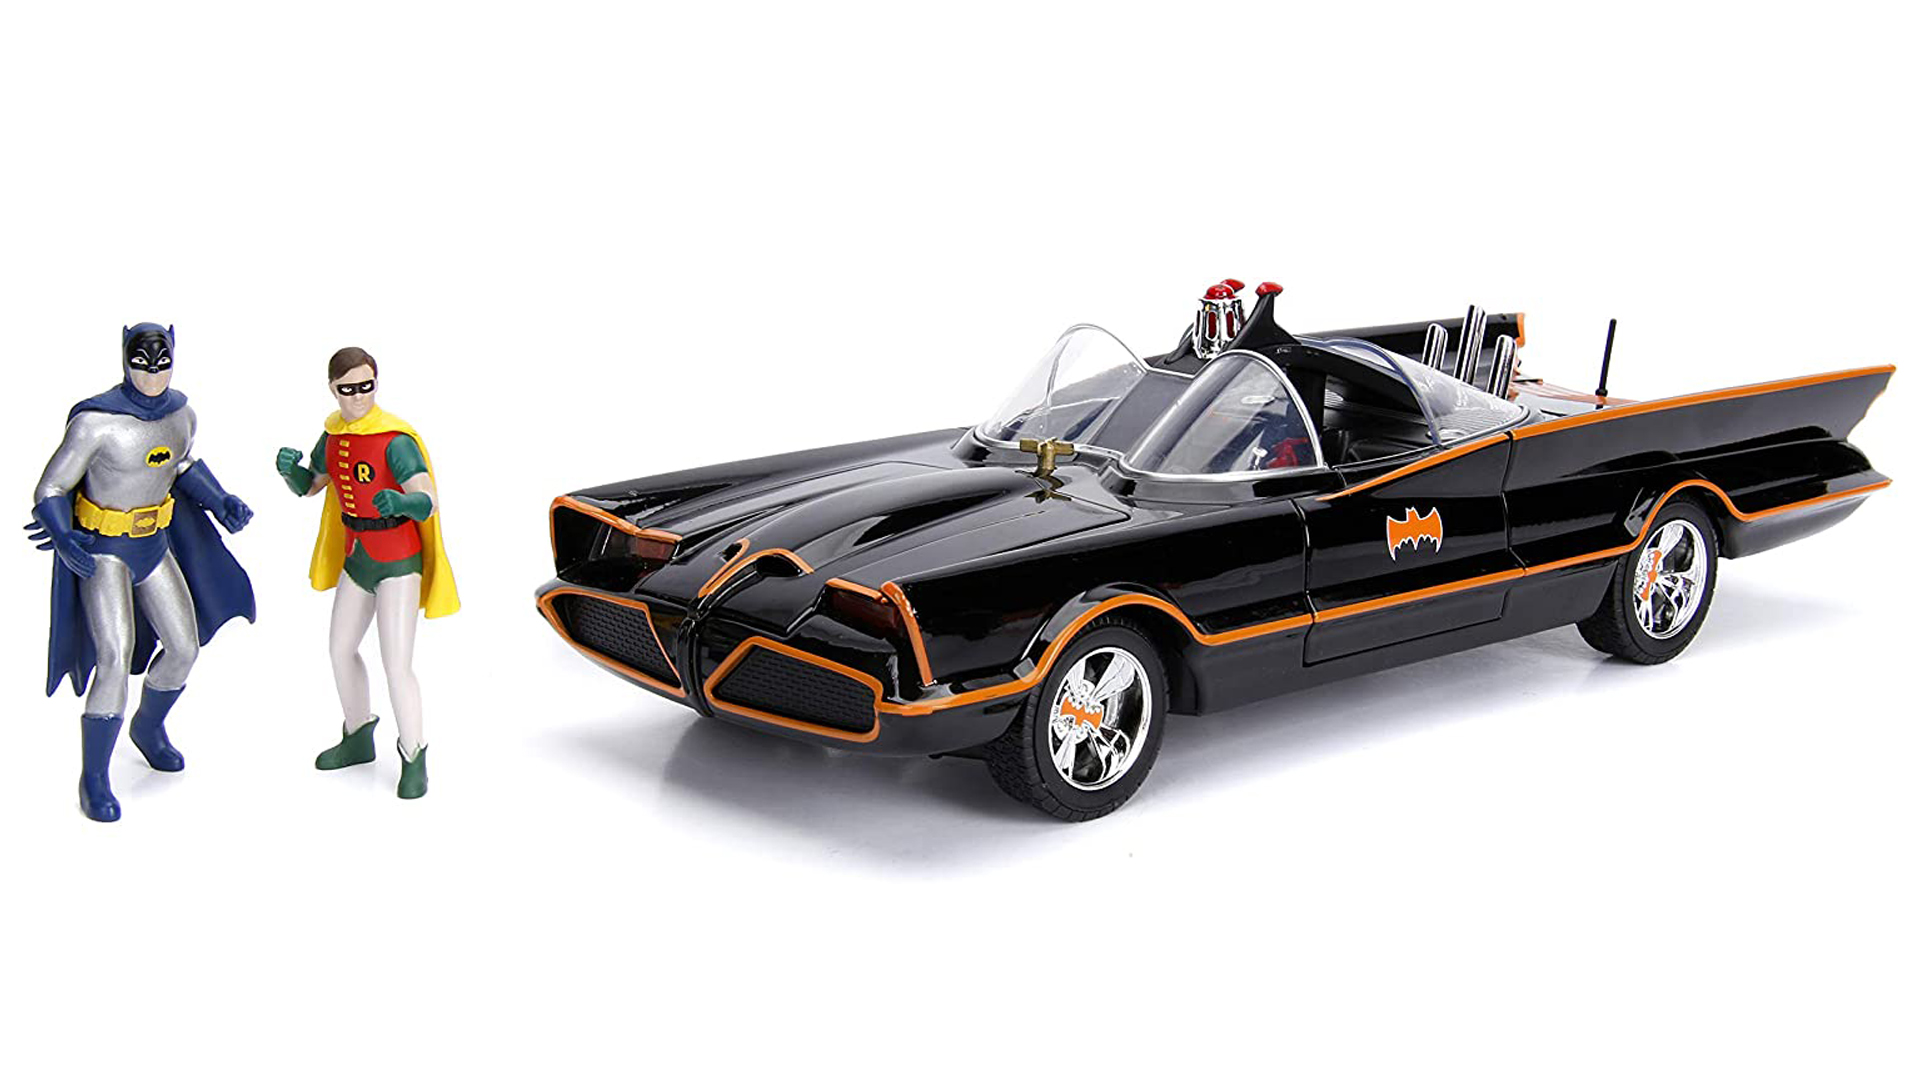 The Adam West Batmobile with Action Figures